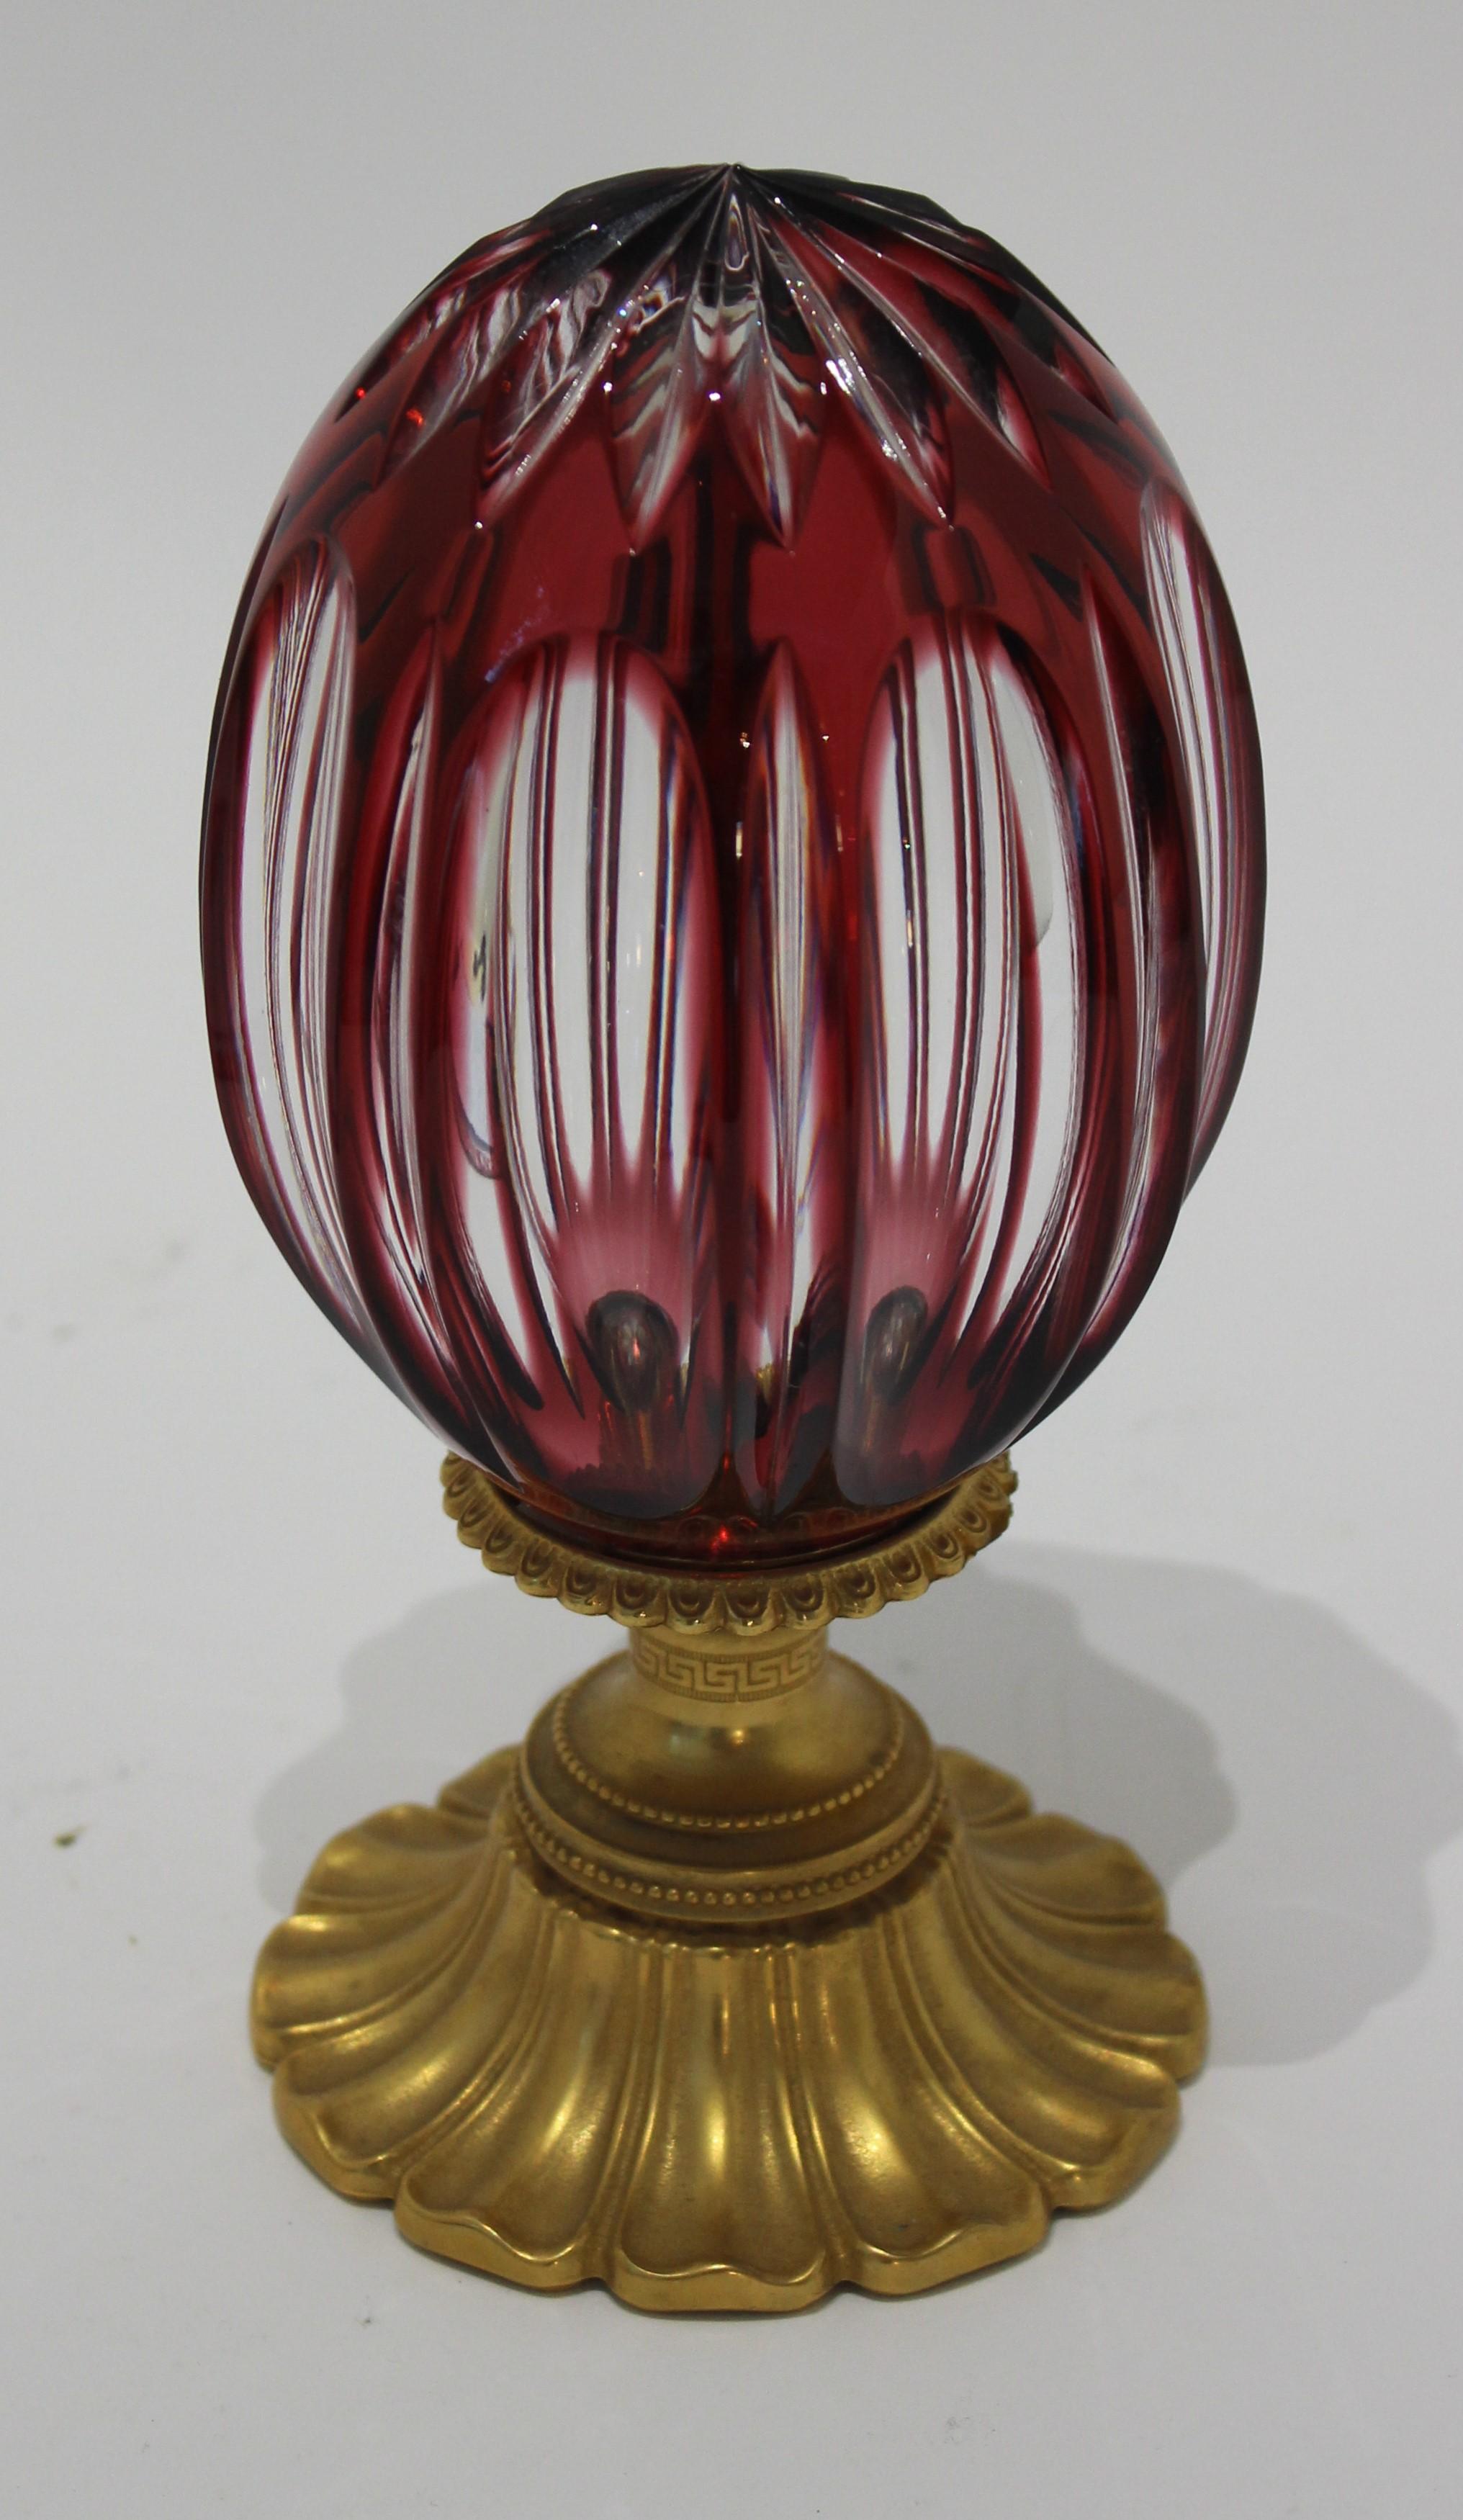 Vintage 1970s ruby red cut to clear crystal egg on bronze doré Greek key stand by Baldi Firenze, Italy.
This is a rare example of Baldi Firenze's exclusive workshop before their current House Jewels line was marketed.